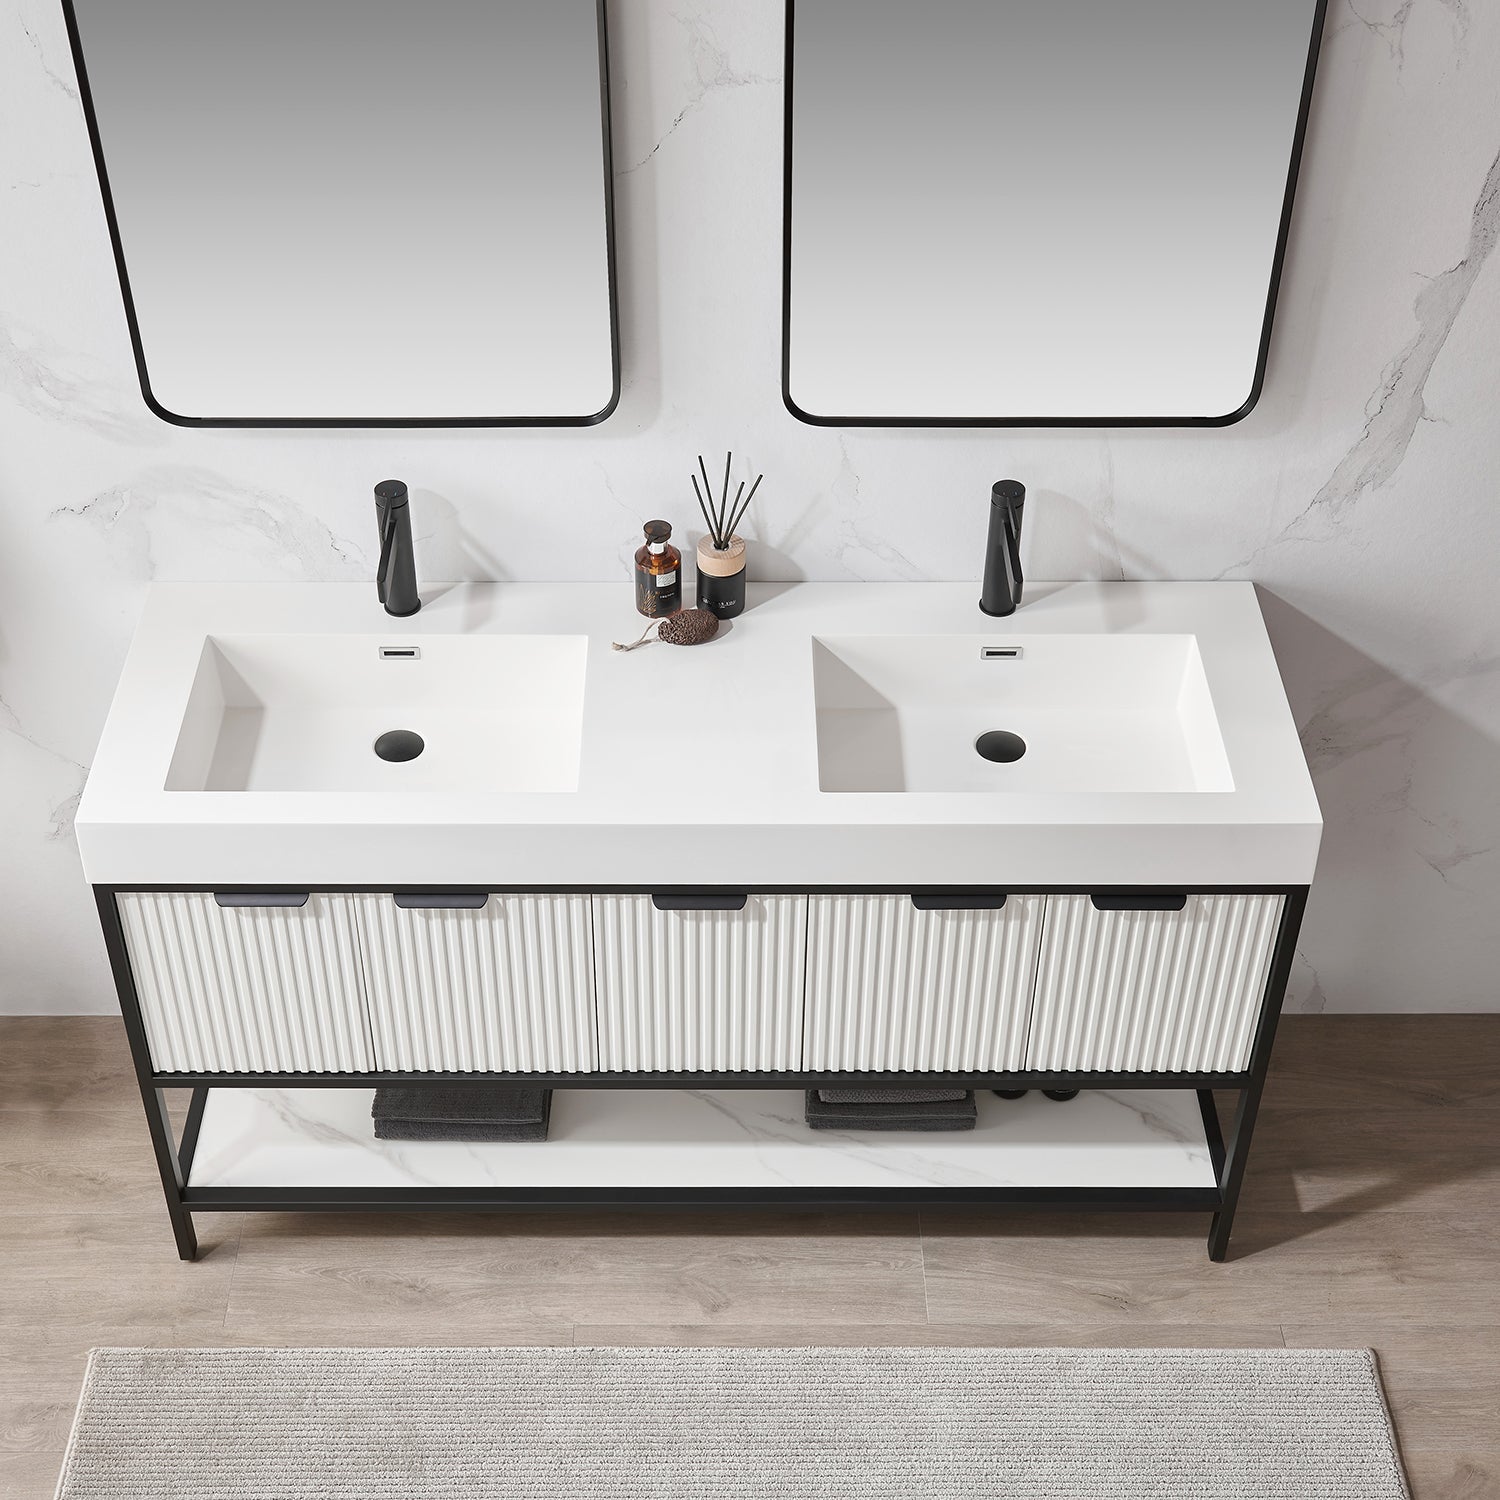 Vinnova Design Marcilla 60" Double Sink Bath Vanity in White with One Piece Composite Stone Sink Top - New Star Living